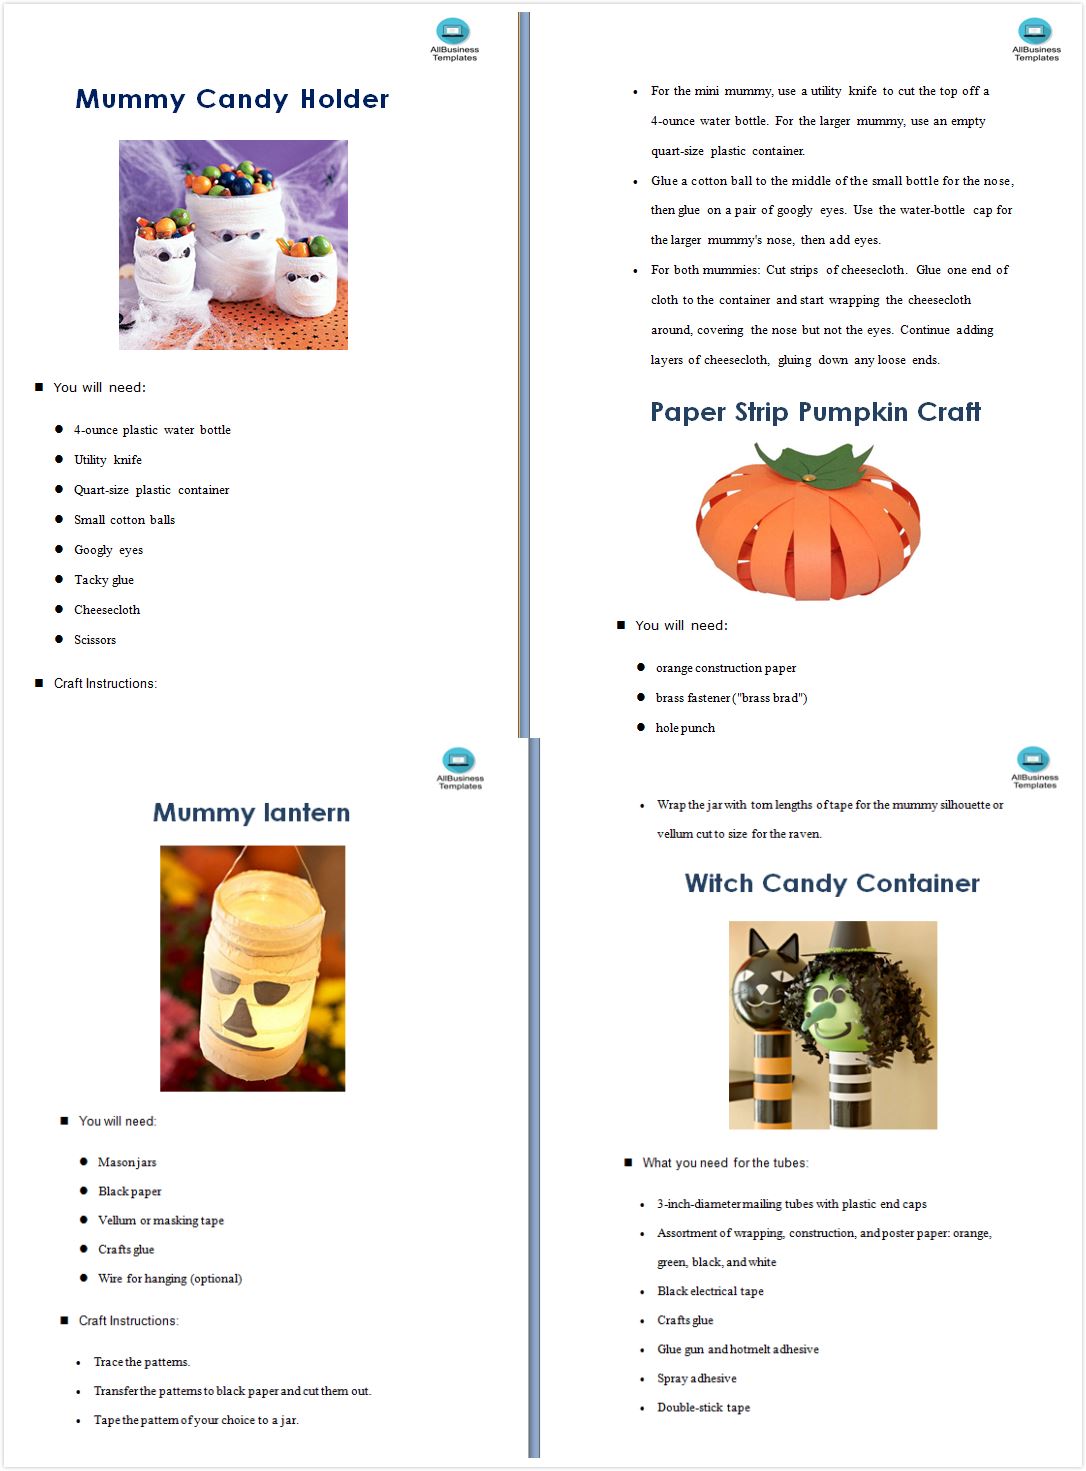 Halloween crafts and craft ideas for kids main image